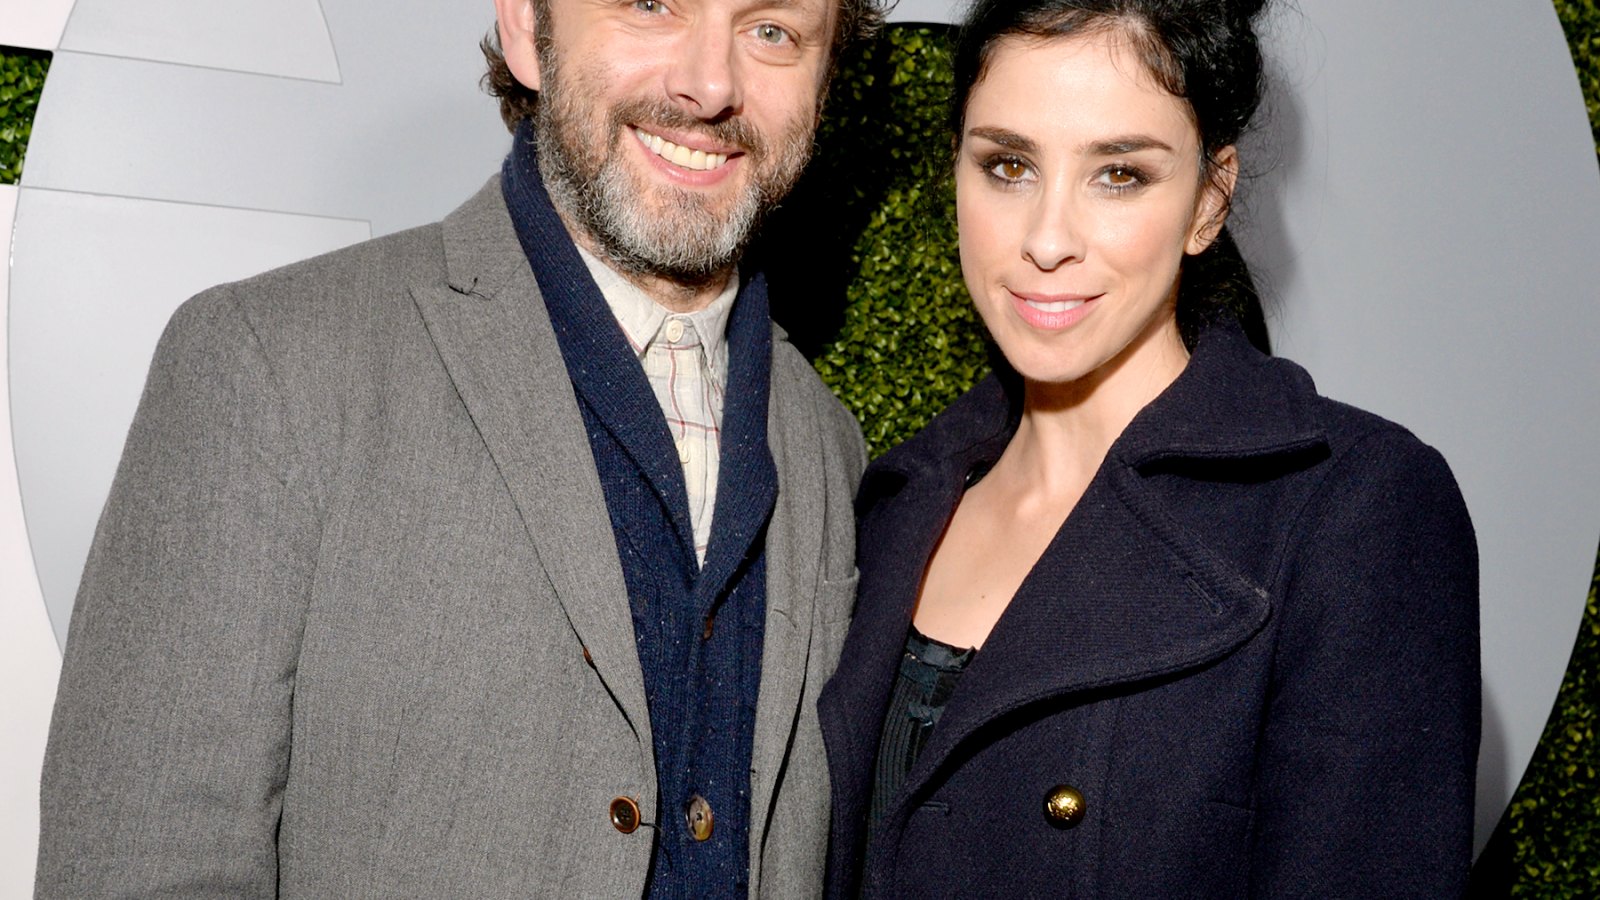 Sarah Silverman Got Michael Sheen "Obsessed" With The Bachelorette